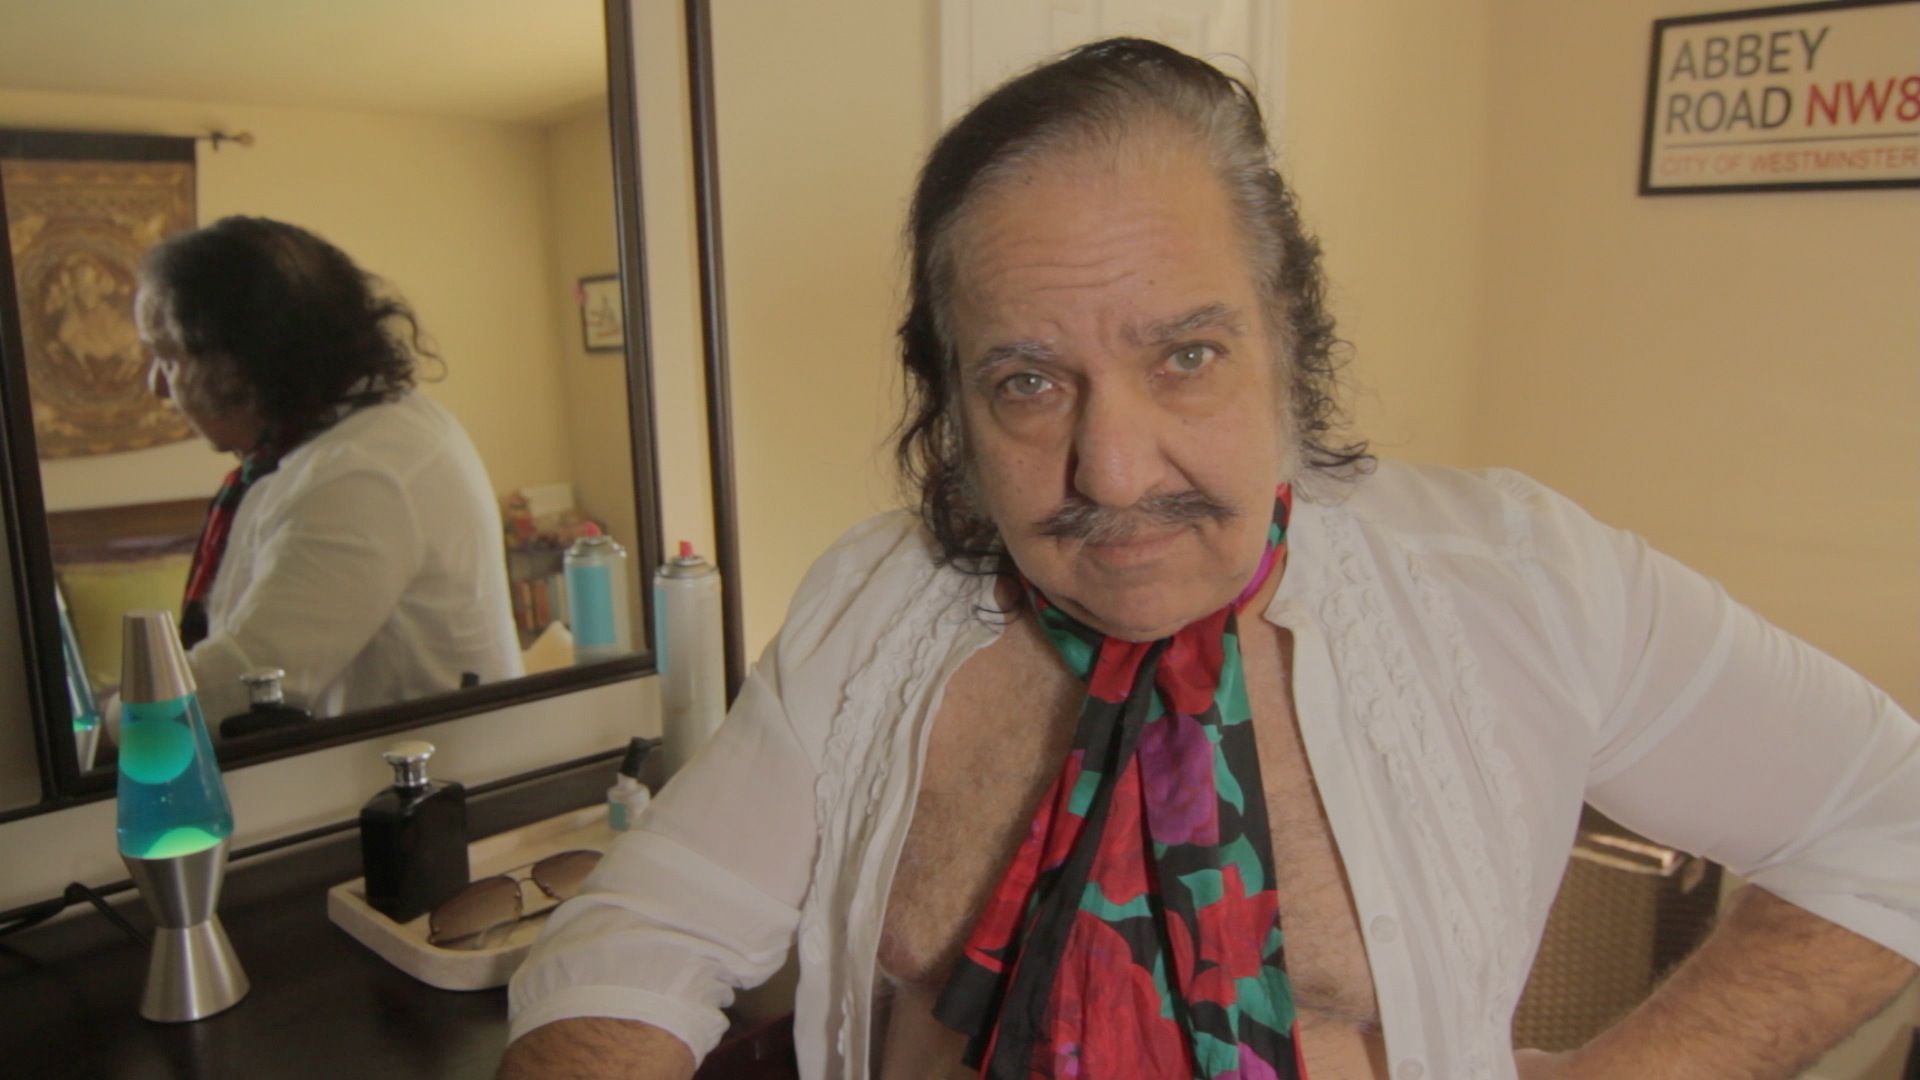 Interview With Ron Jeremy Porn Star Hail To The Hedgehog Montreal